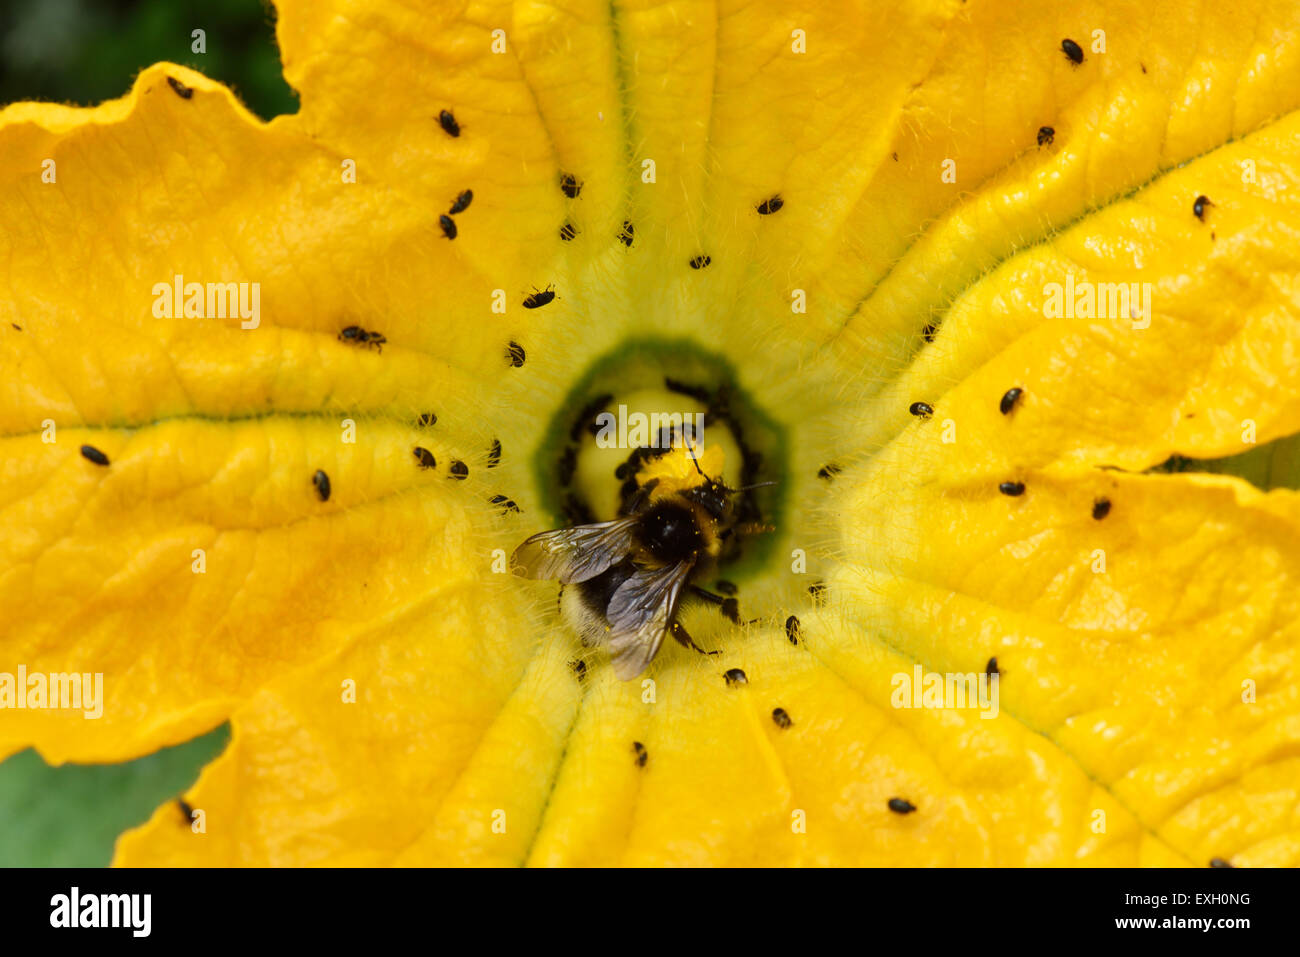 Yellow zucchini or courgette flowers on cucurbit plant with flower beetles, Brassicogethes aeneus, and bumblebee pollinator, Berksh Stock Photo